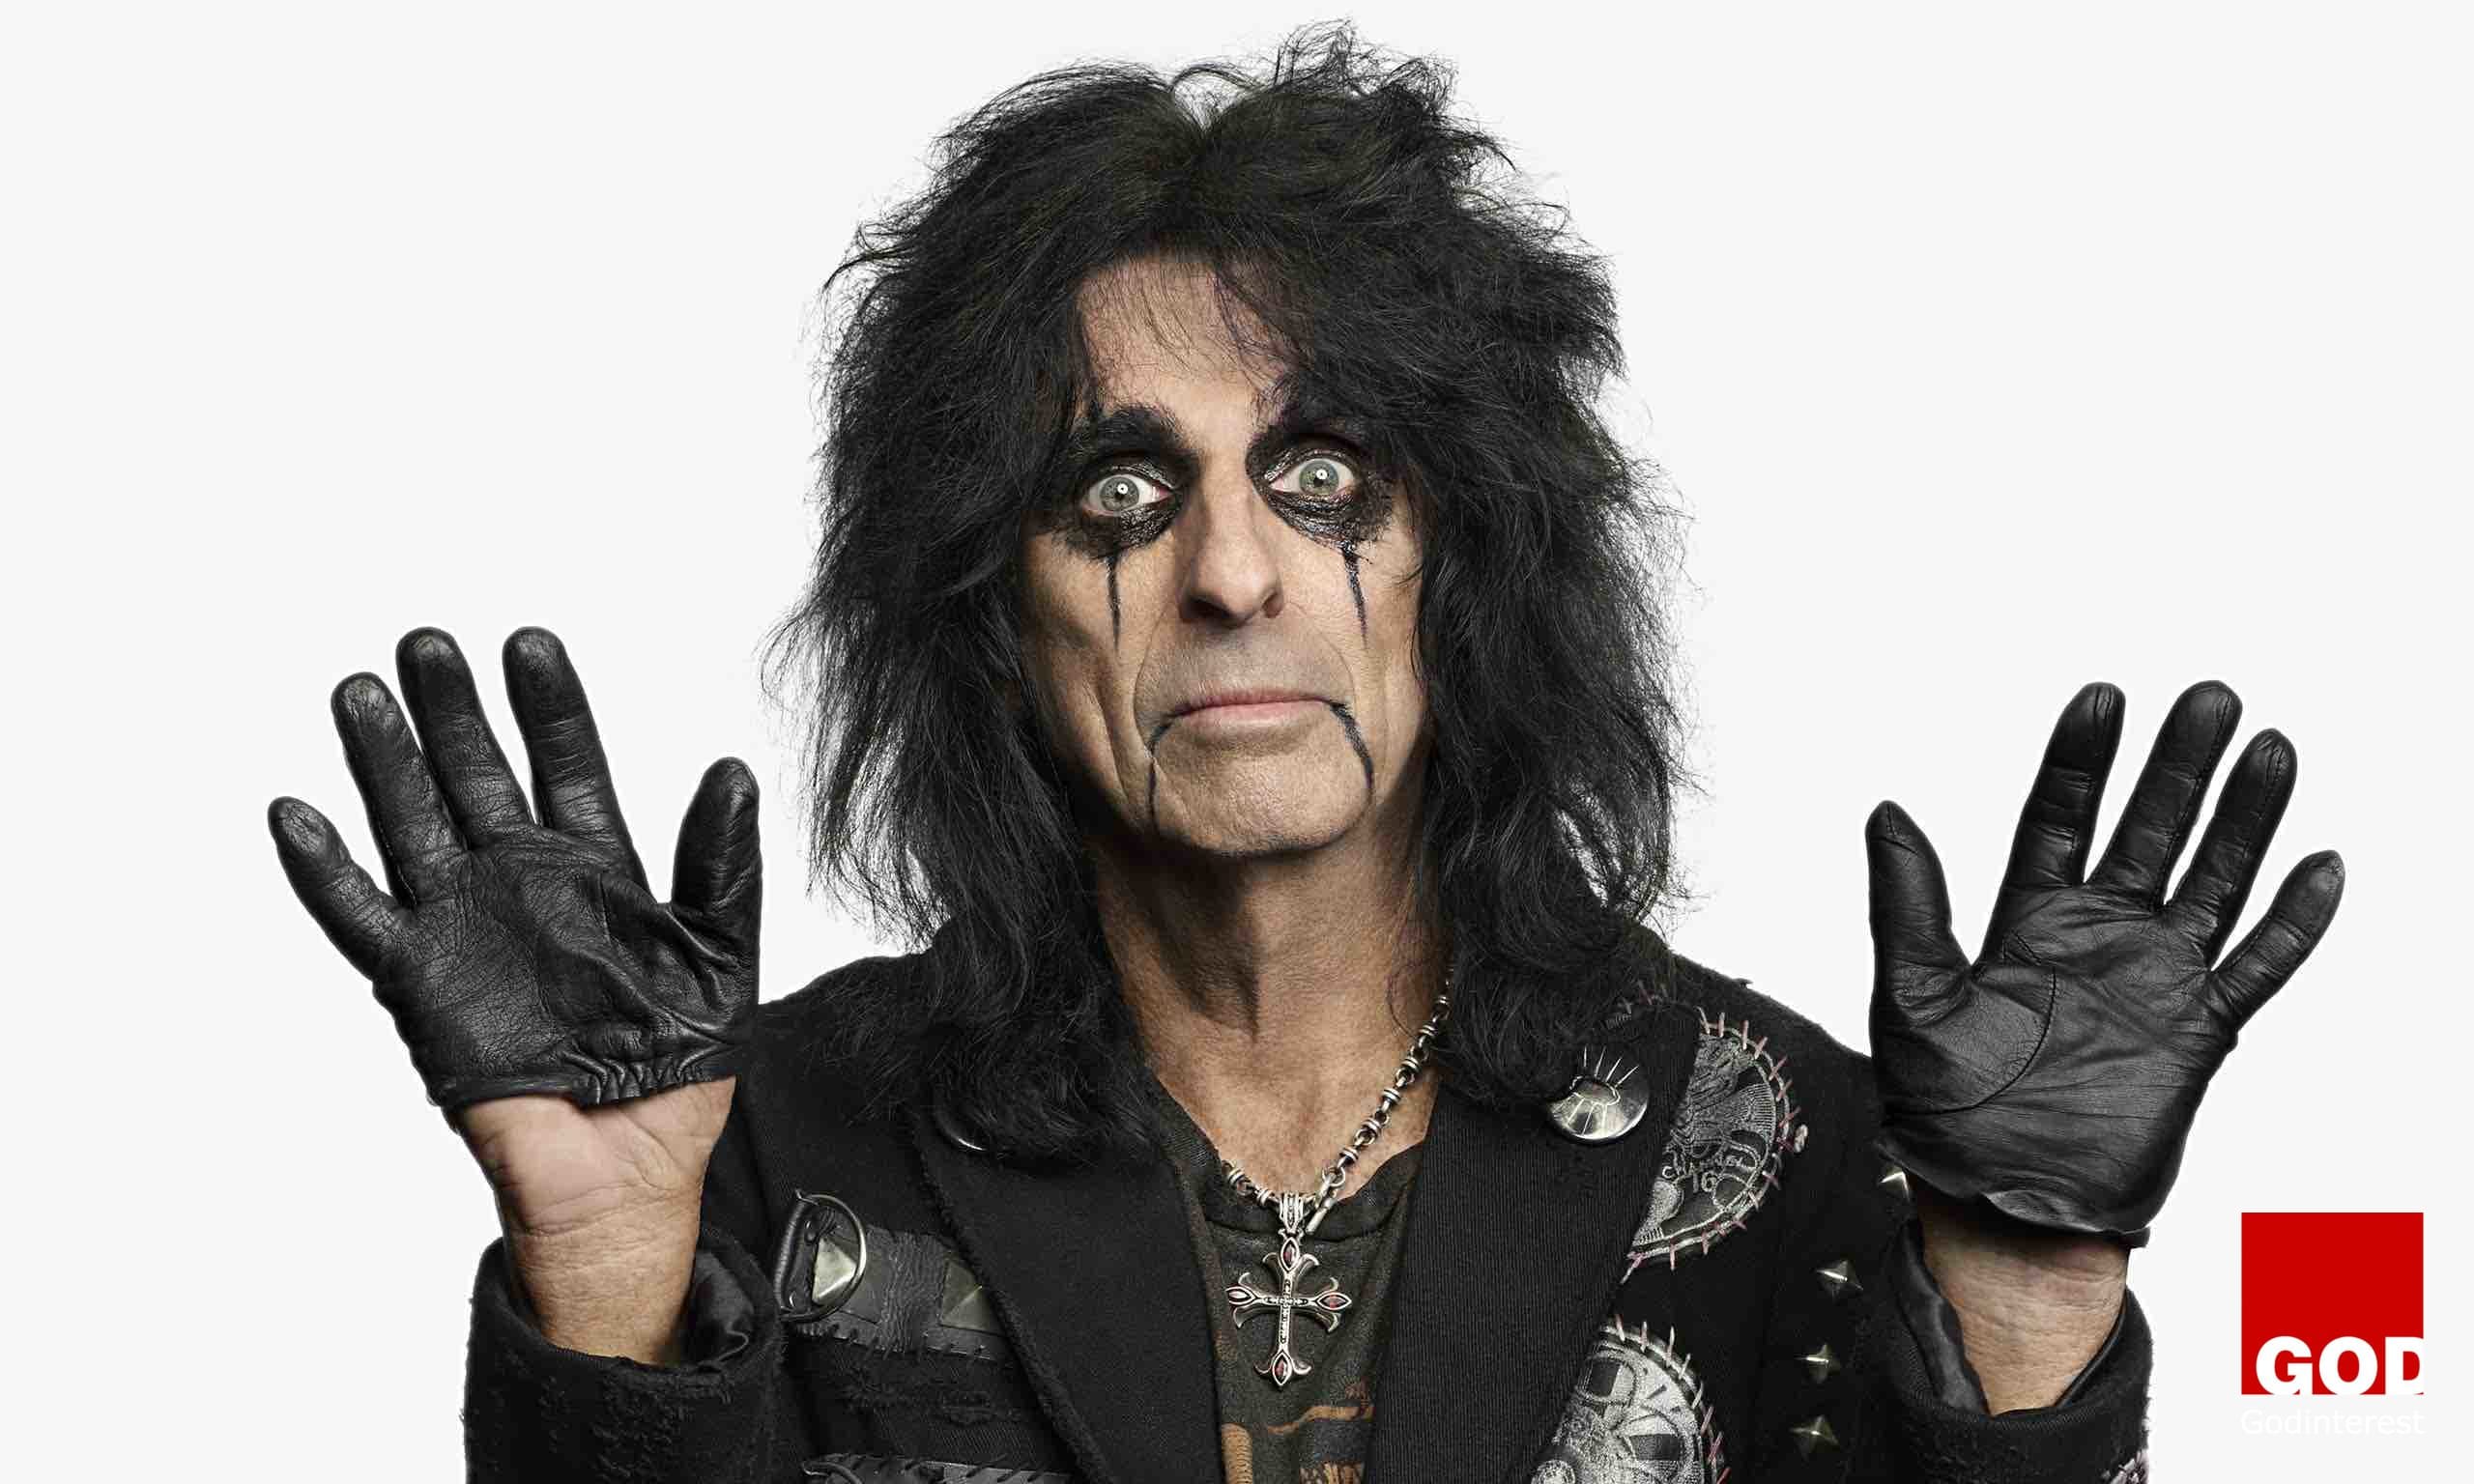 Can Rock Star Alice Cooper Really Be A Christian?